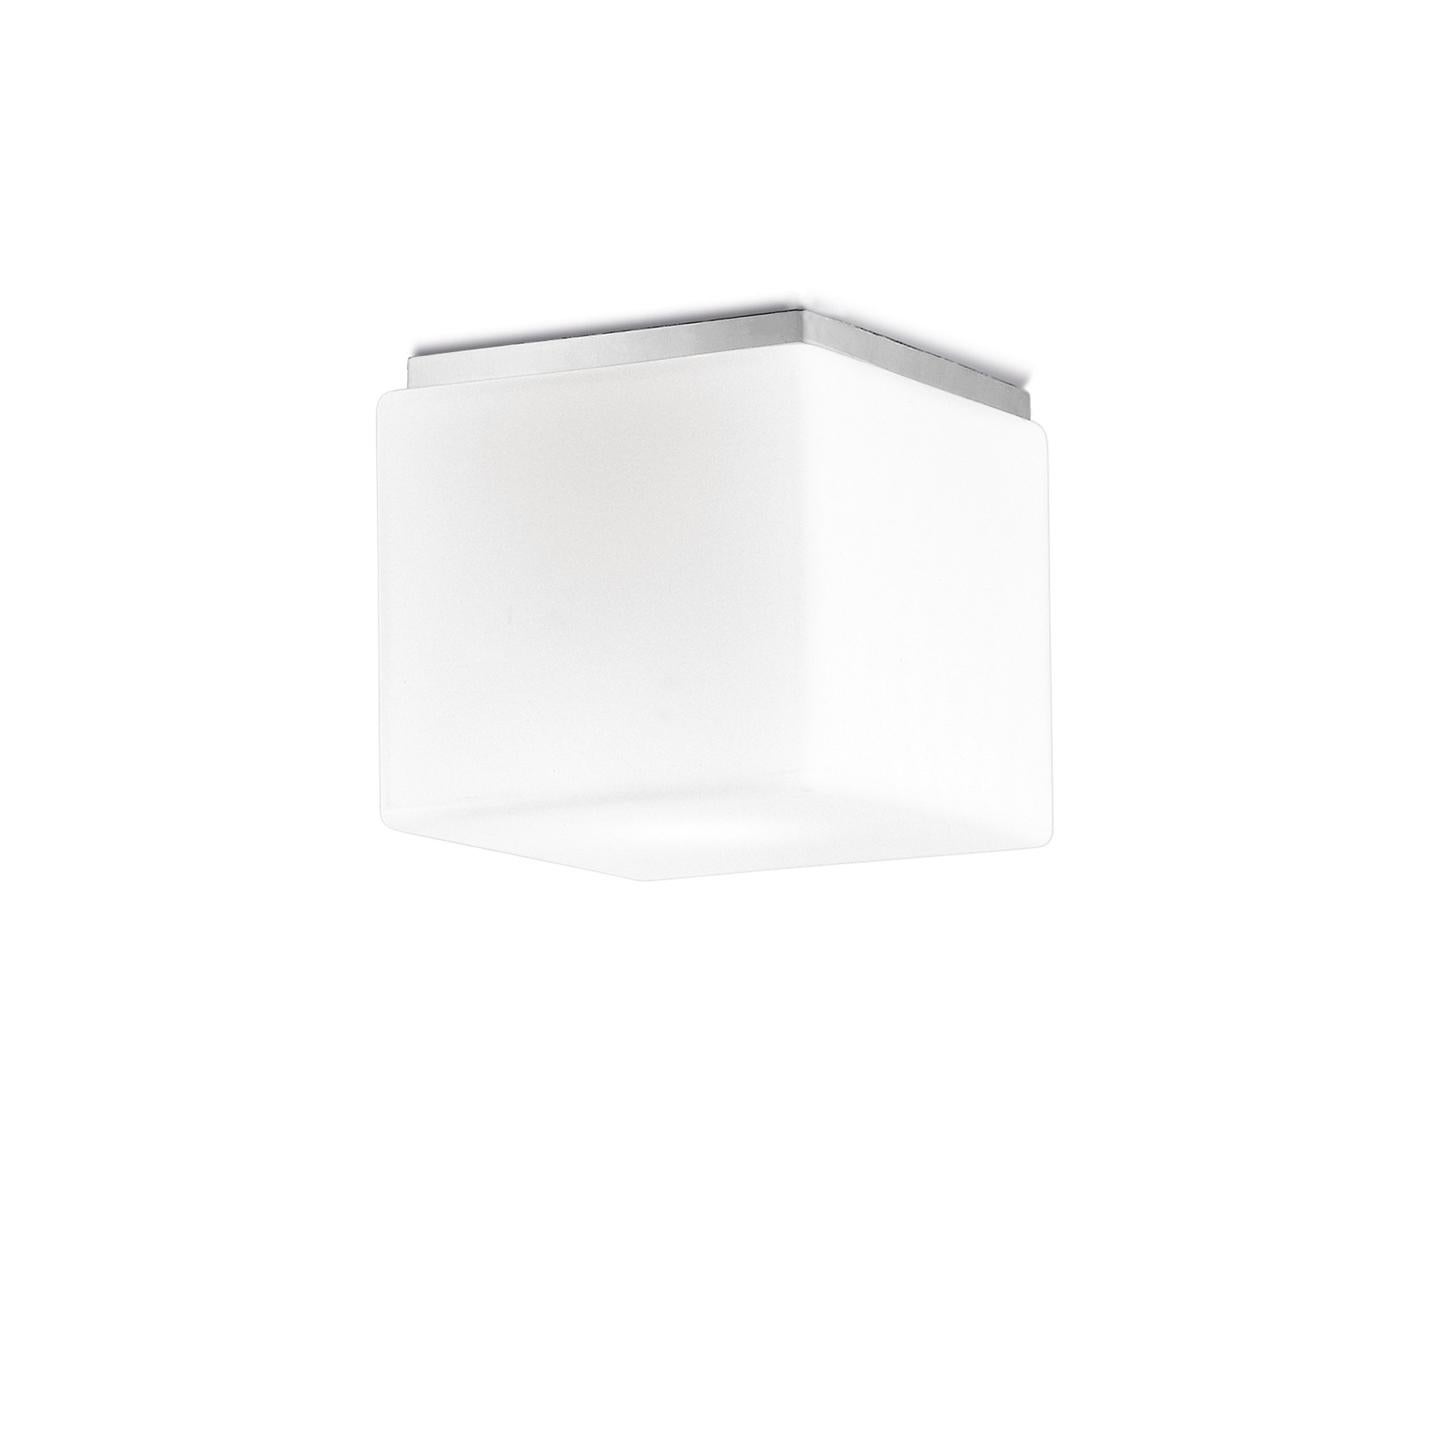 The Cubi ceiling/wall lamp, designed in 2000, is an icon of Leucos. Its cubic form is surprising for handmade glass, which makes it a delightful lamp. Its hand blown satin white diffuser is made of multiple layers of glass to create a rich, white